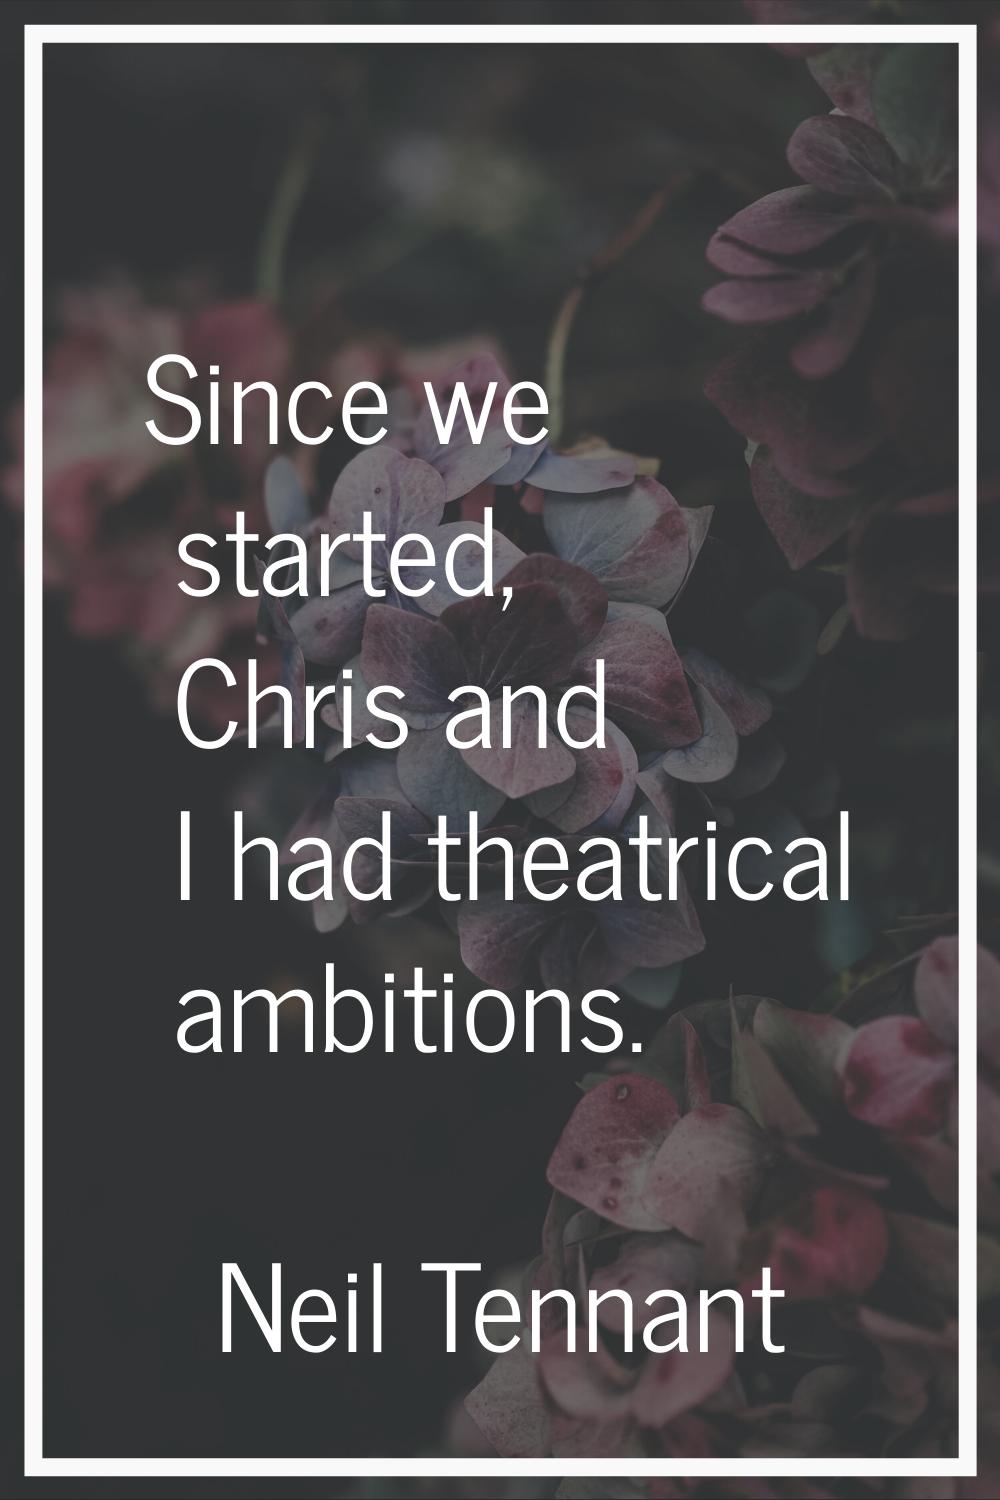 Since we started, Chris and I had theatrical ambitions.